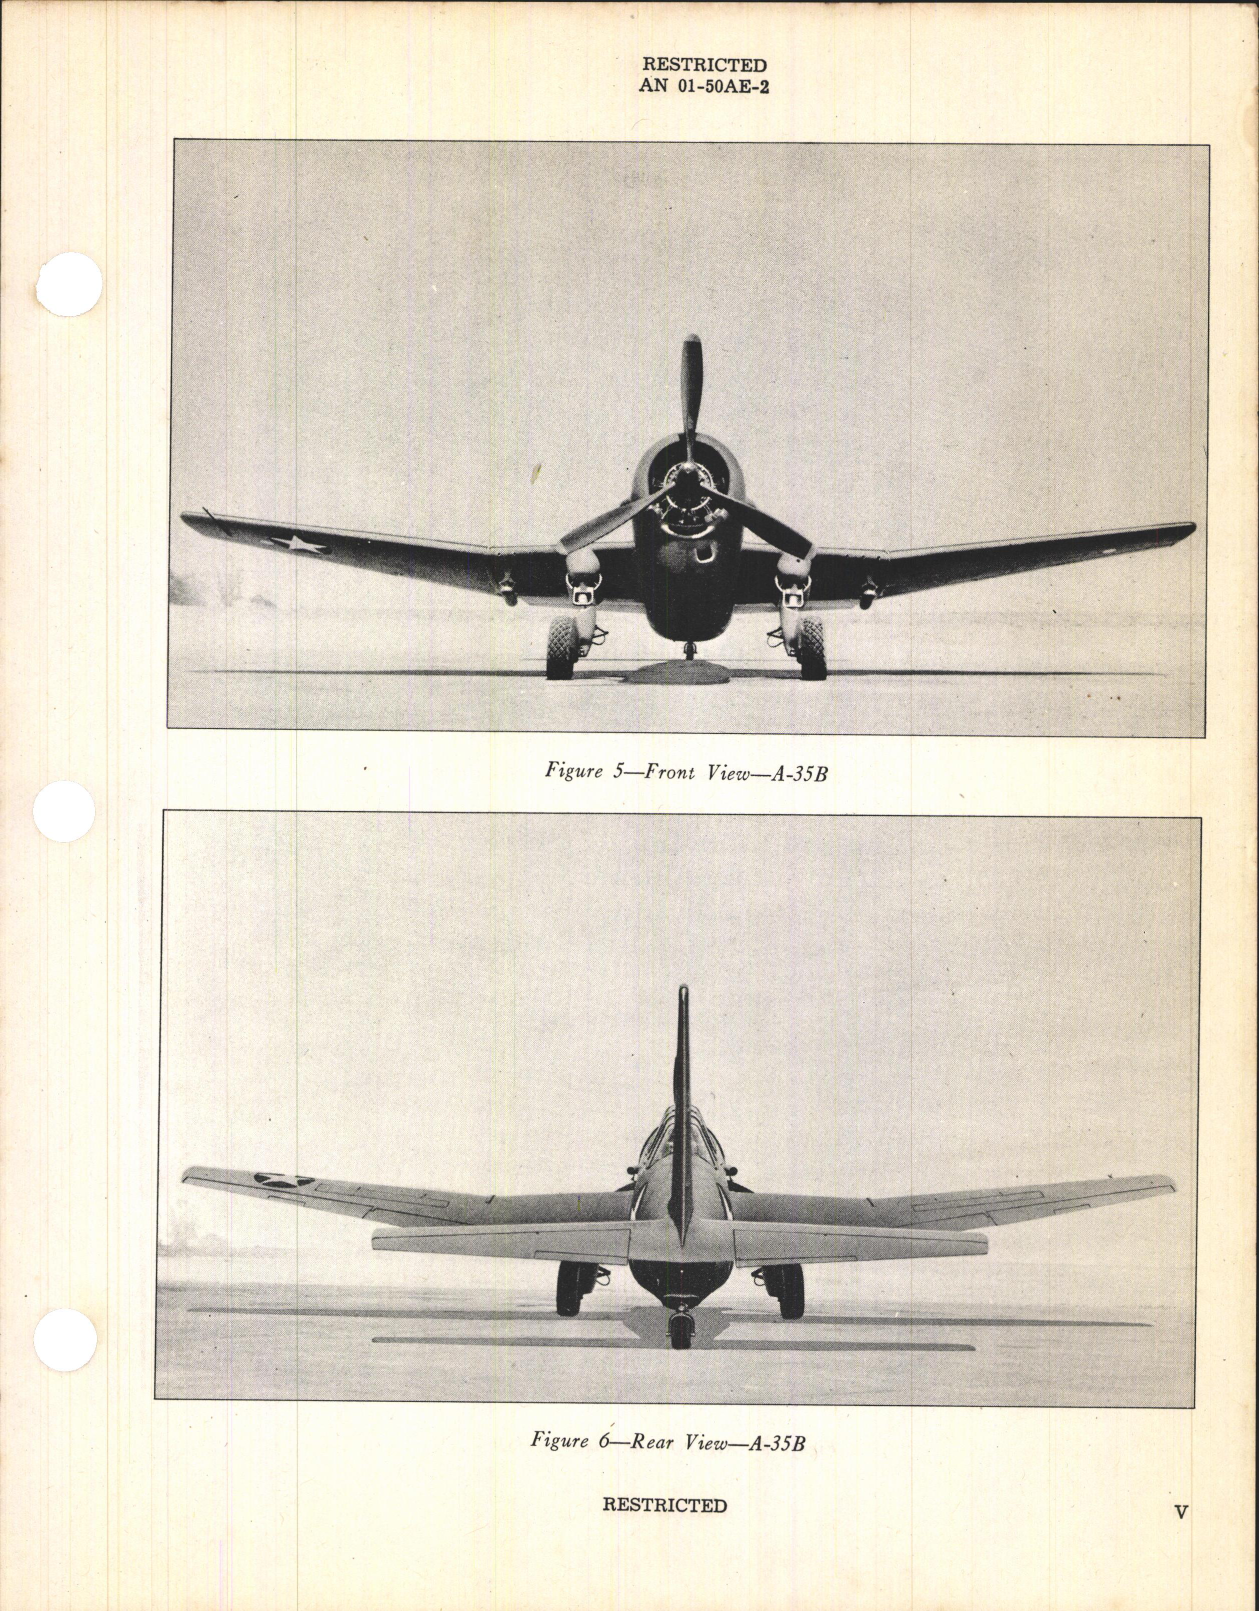 Sample page 7 from AirCorps Library document: Erection and Maintenance Instructions for RA-35B